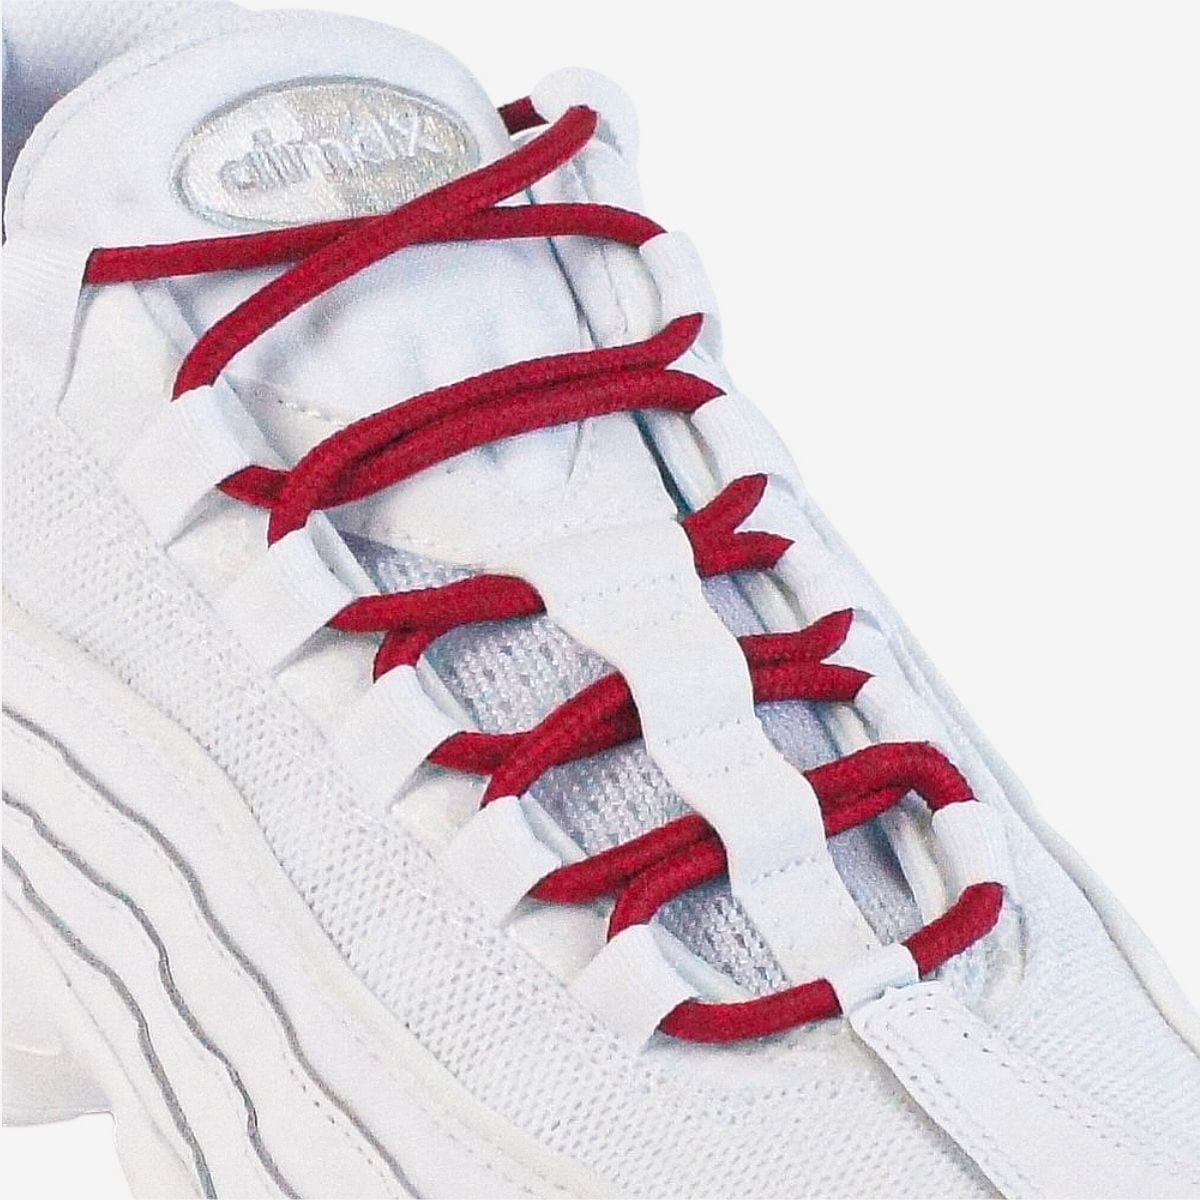 wine-red-round-rope-shoelaces-for-sneakers-and-running-shoes